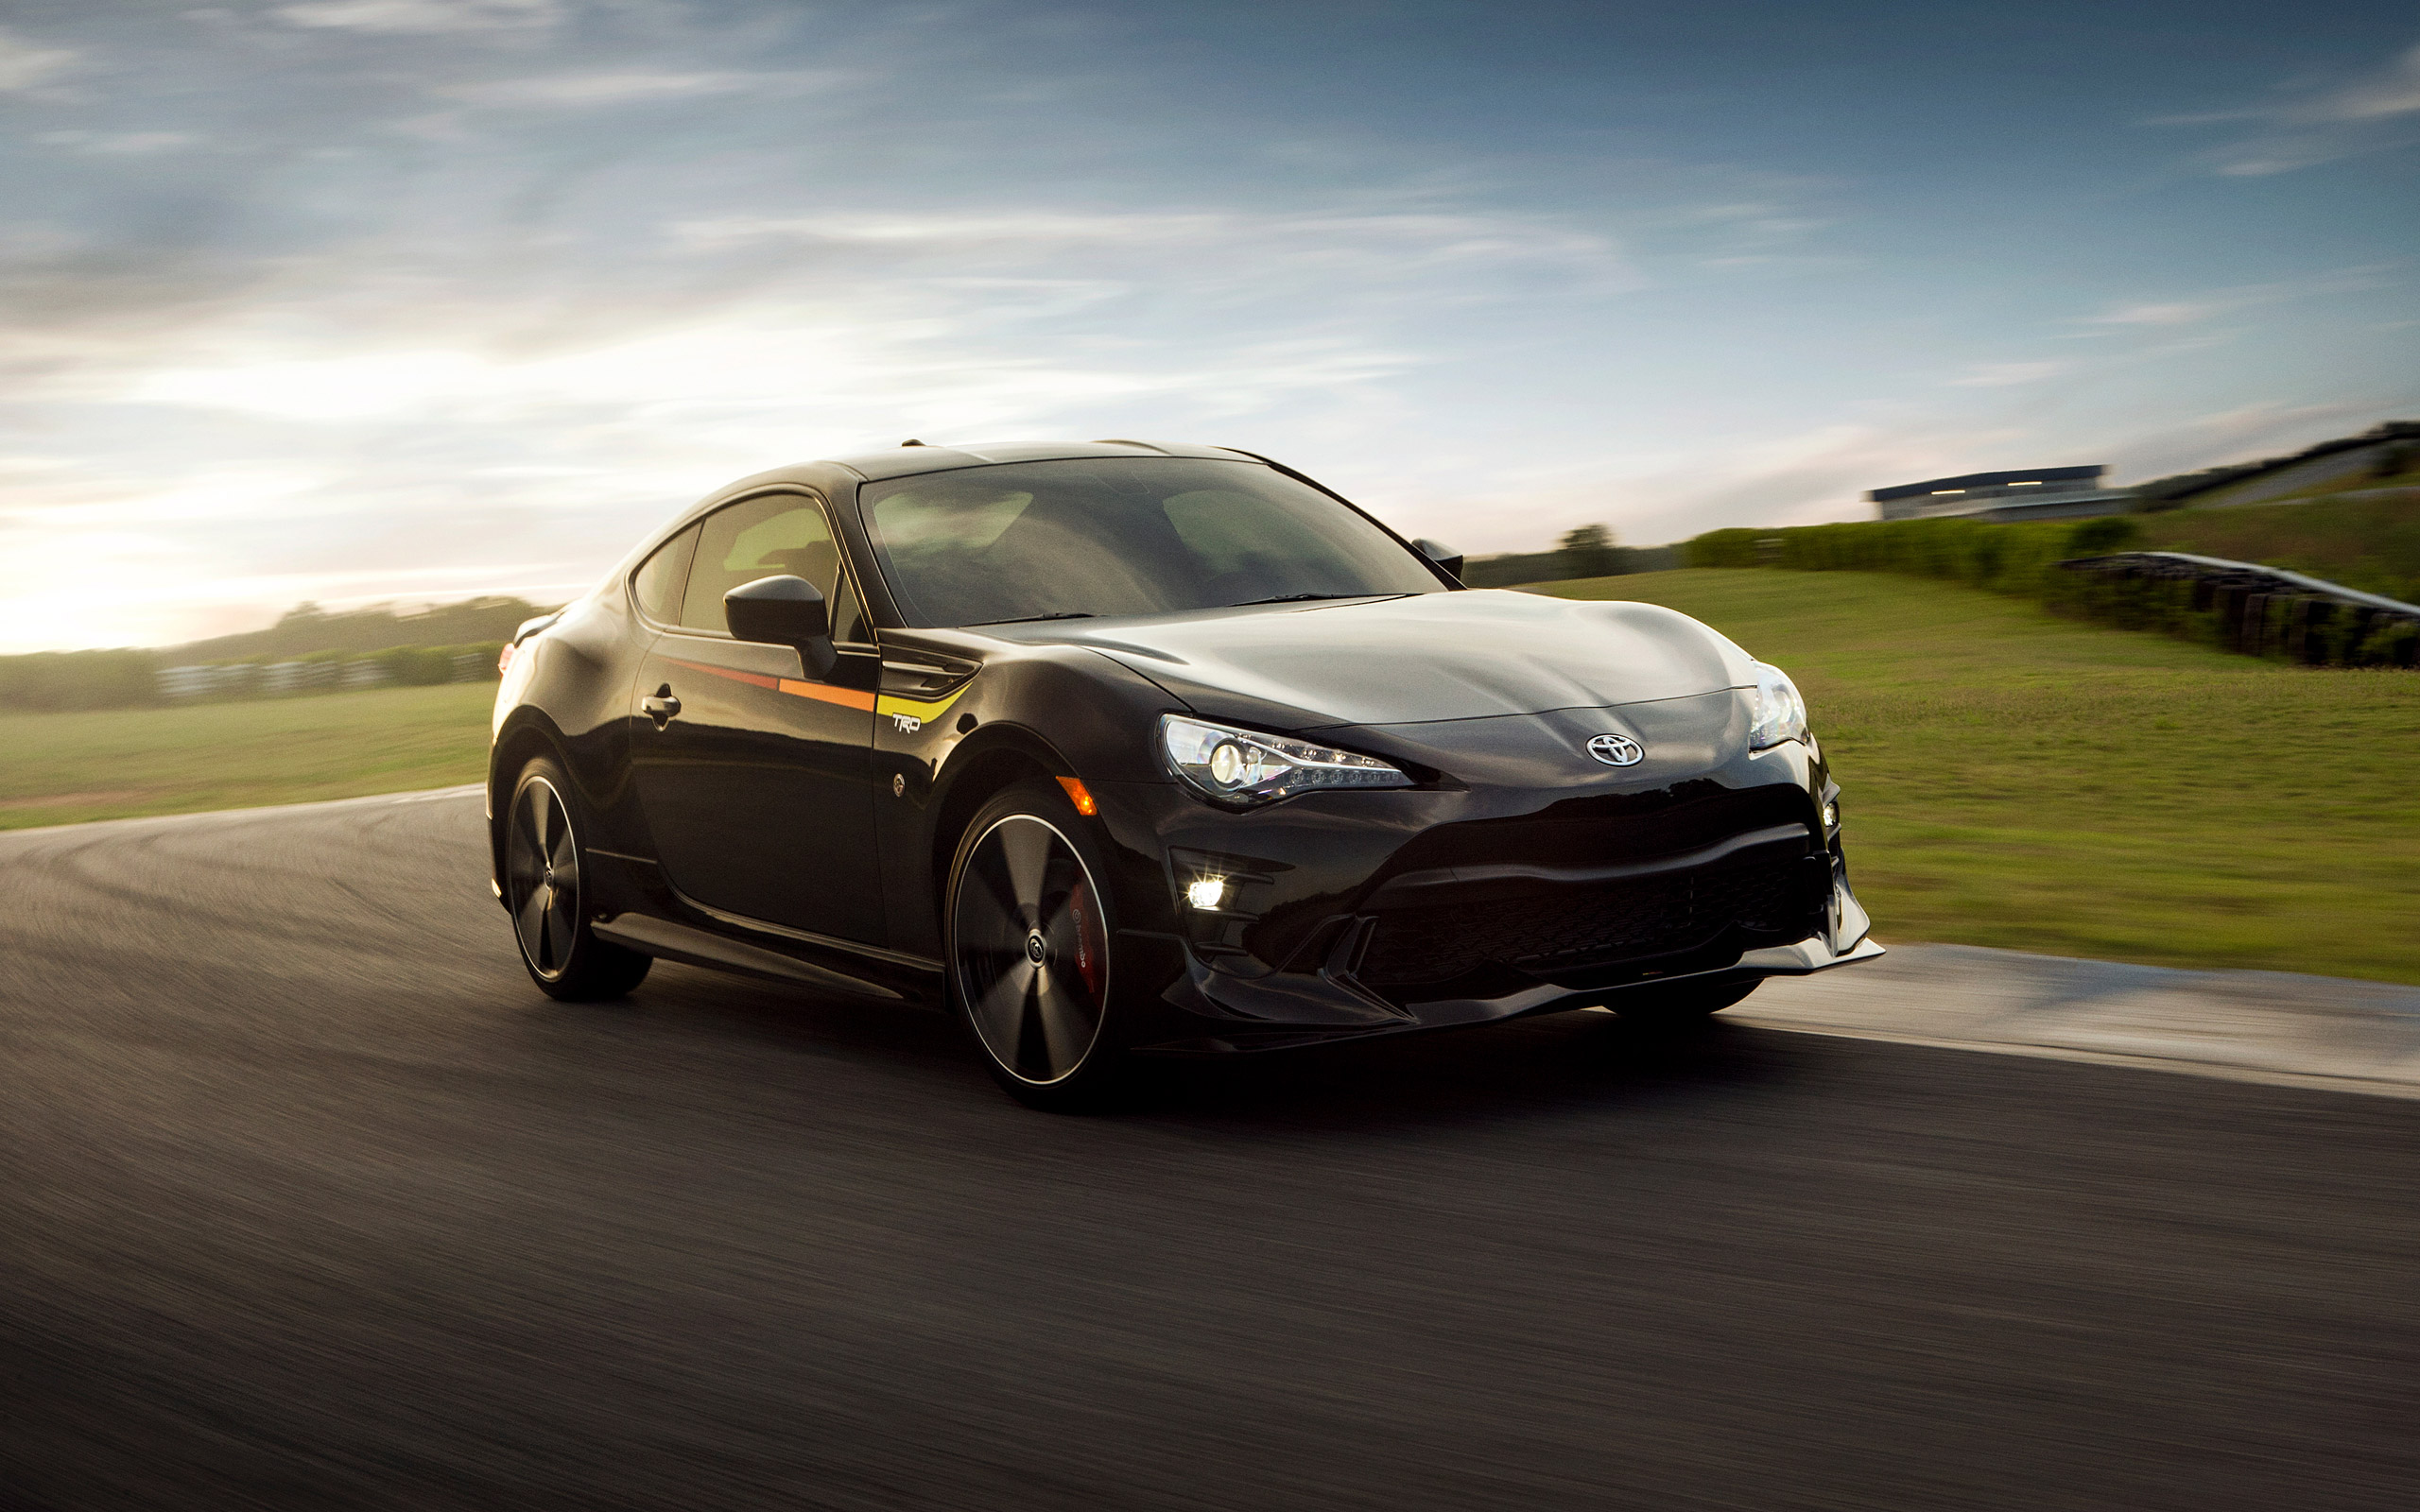  2019 Toyota 86 TRD Special Edition Wallpaper.